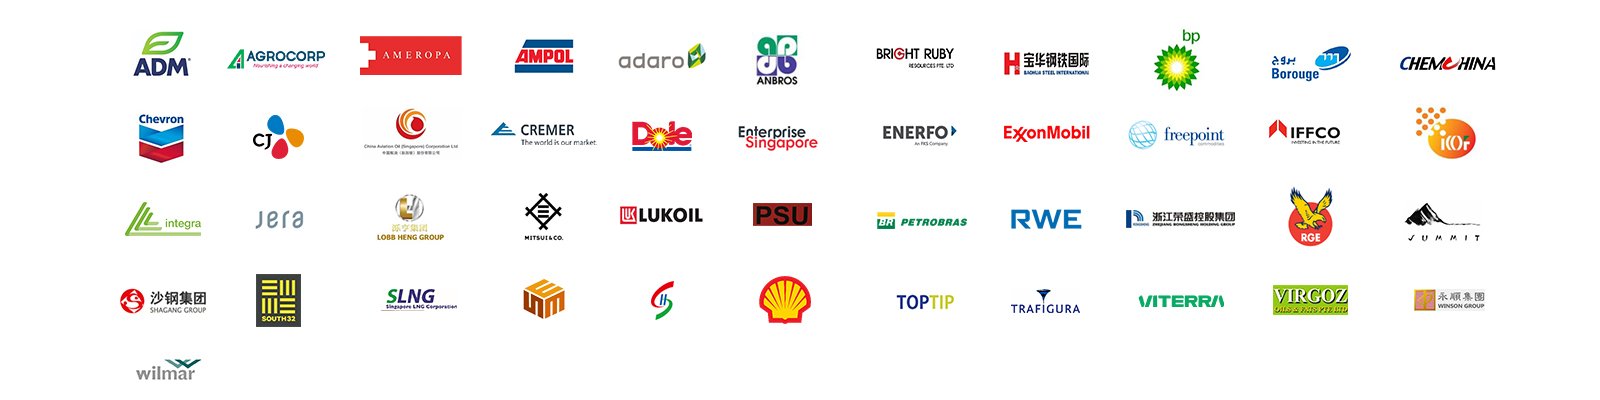 Logos of CEIT’s various industry partners, including Dole, BP, Chevron, and Adaro